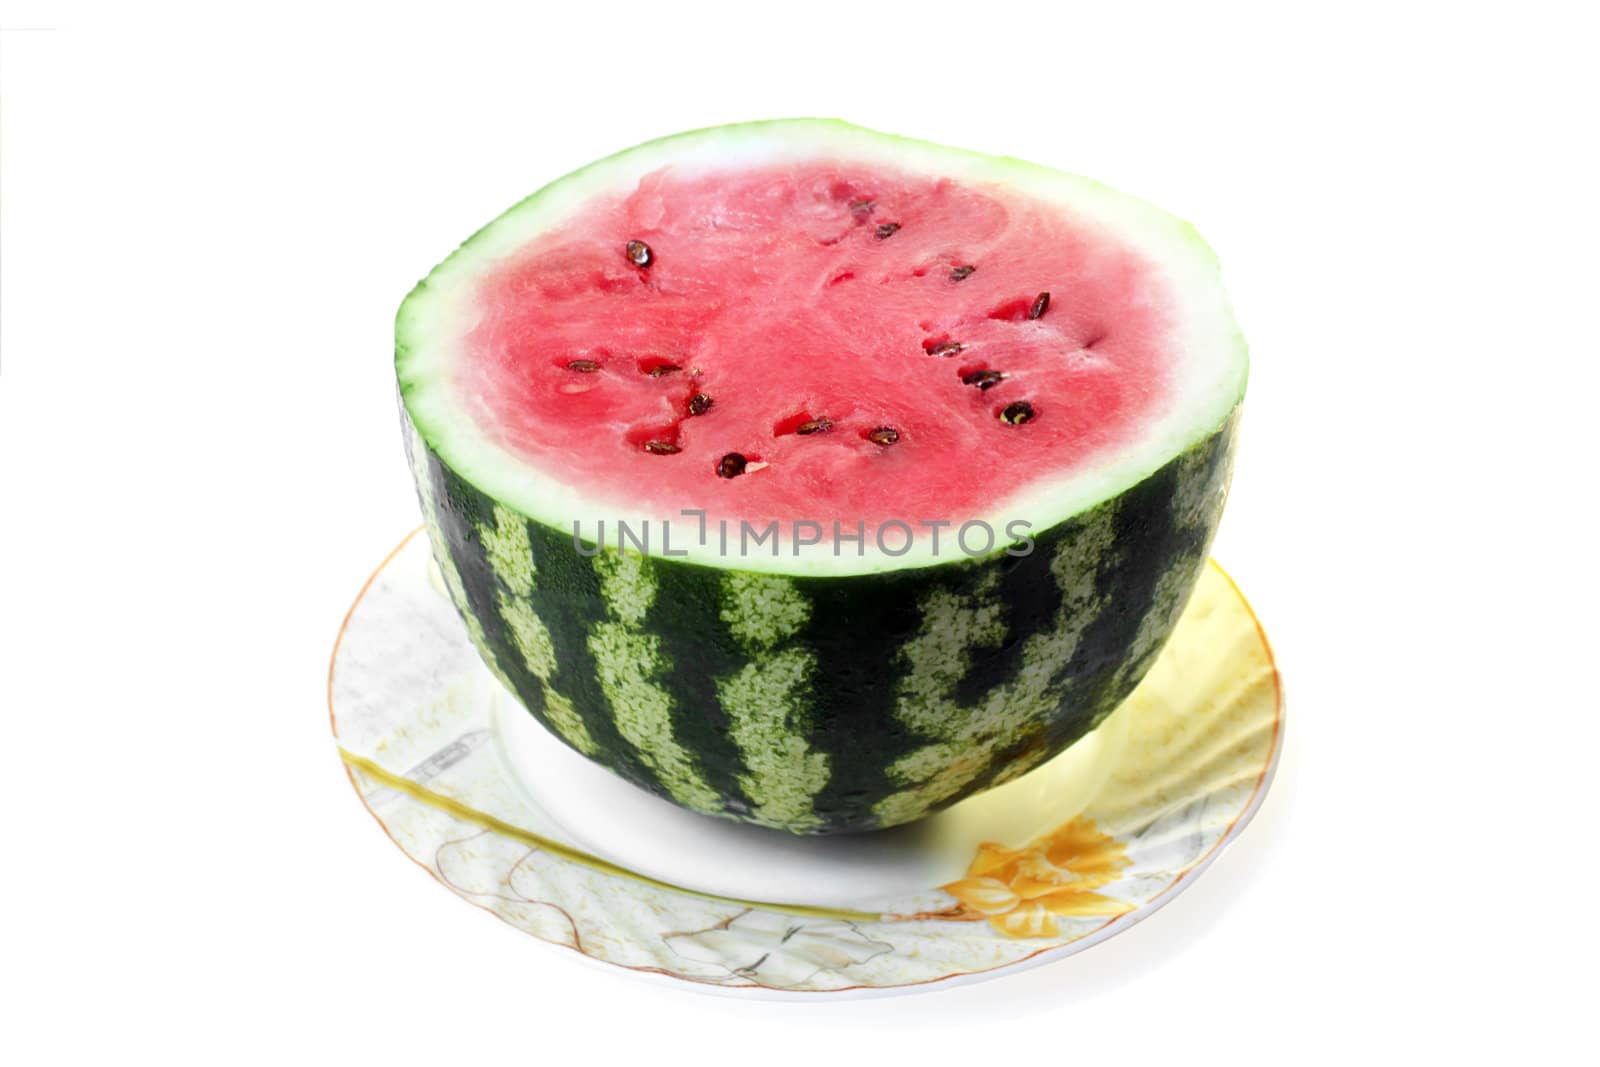 half of watermelon on a plate over white